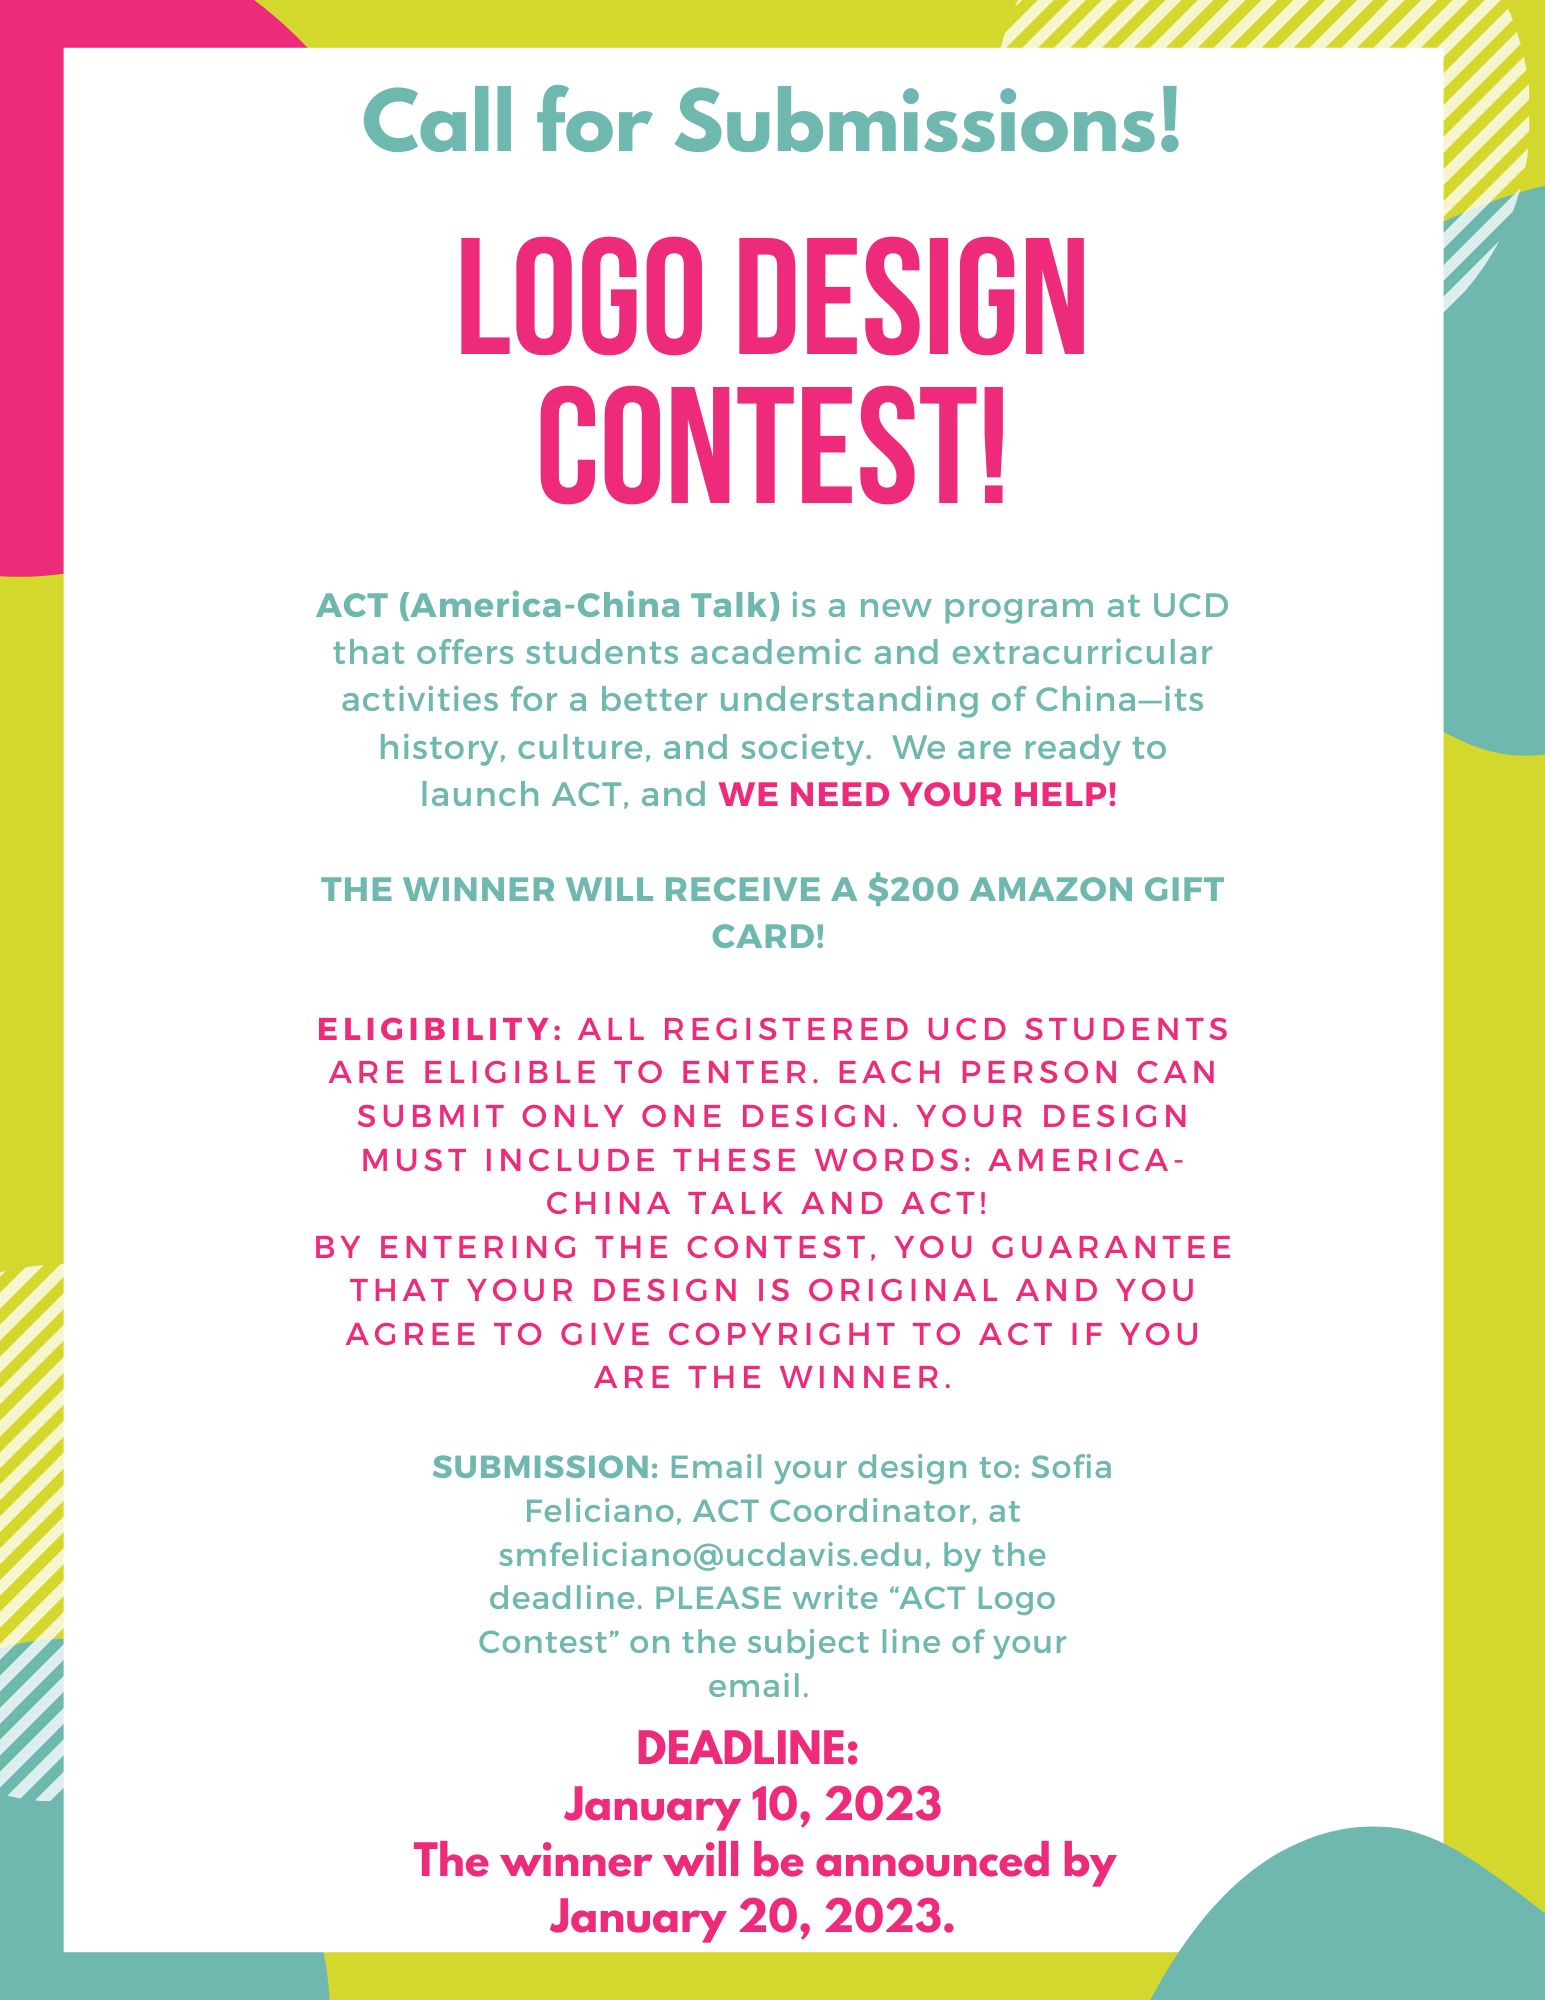 A flyer for the ACT logo design contest!